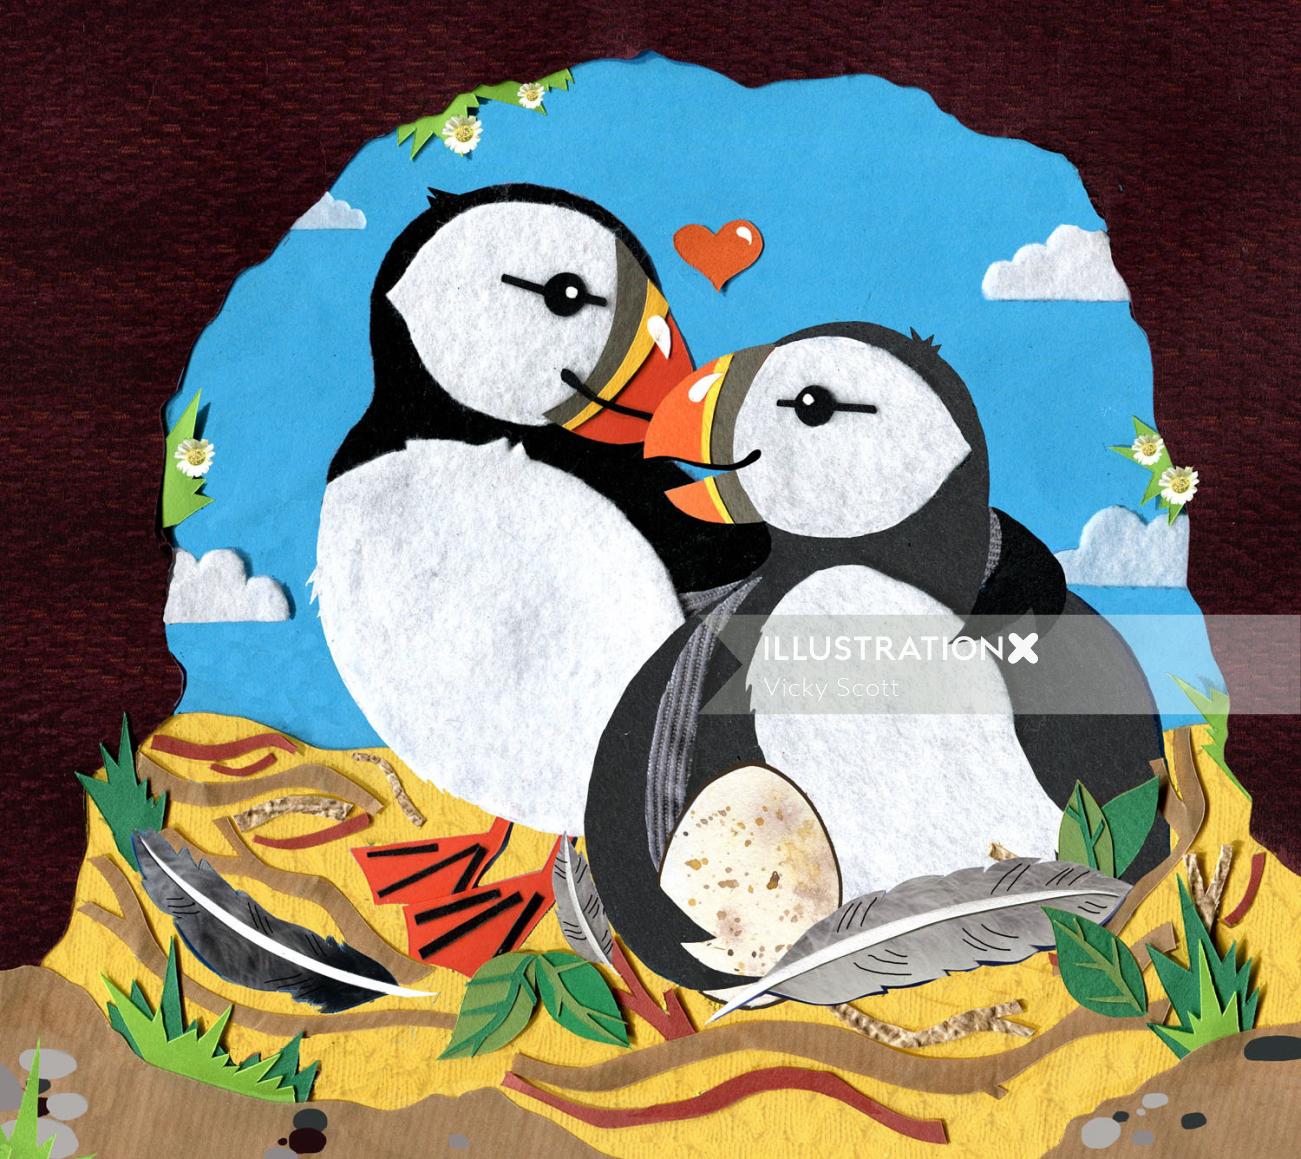 puffins, birds, egg, baby bird, family, kids, childrens, story, feathers